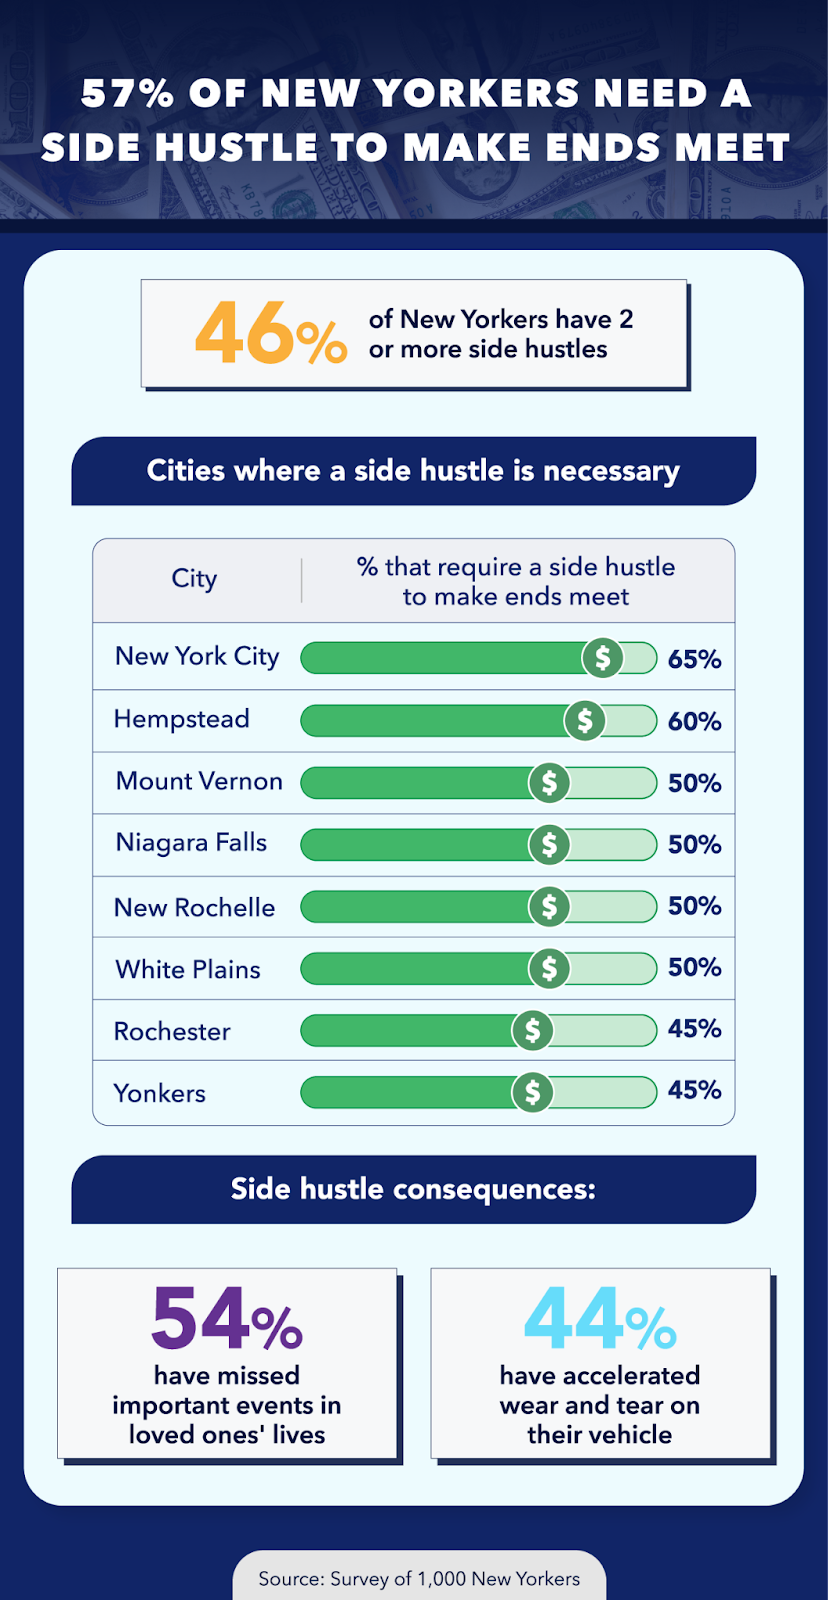 57% Of New Yorkers Need a Side Hustle to Make Ends Meet